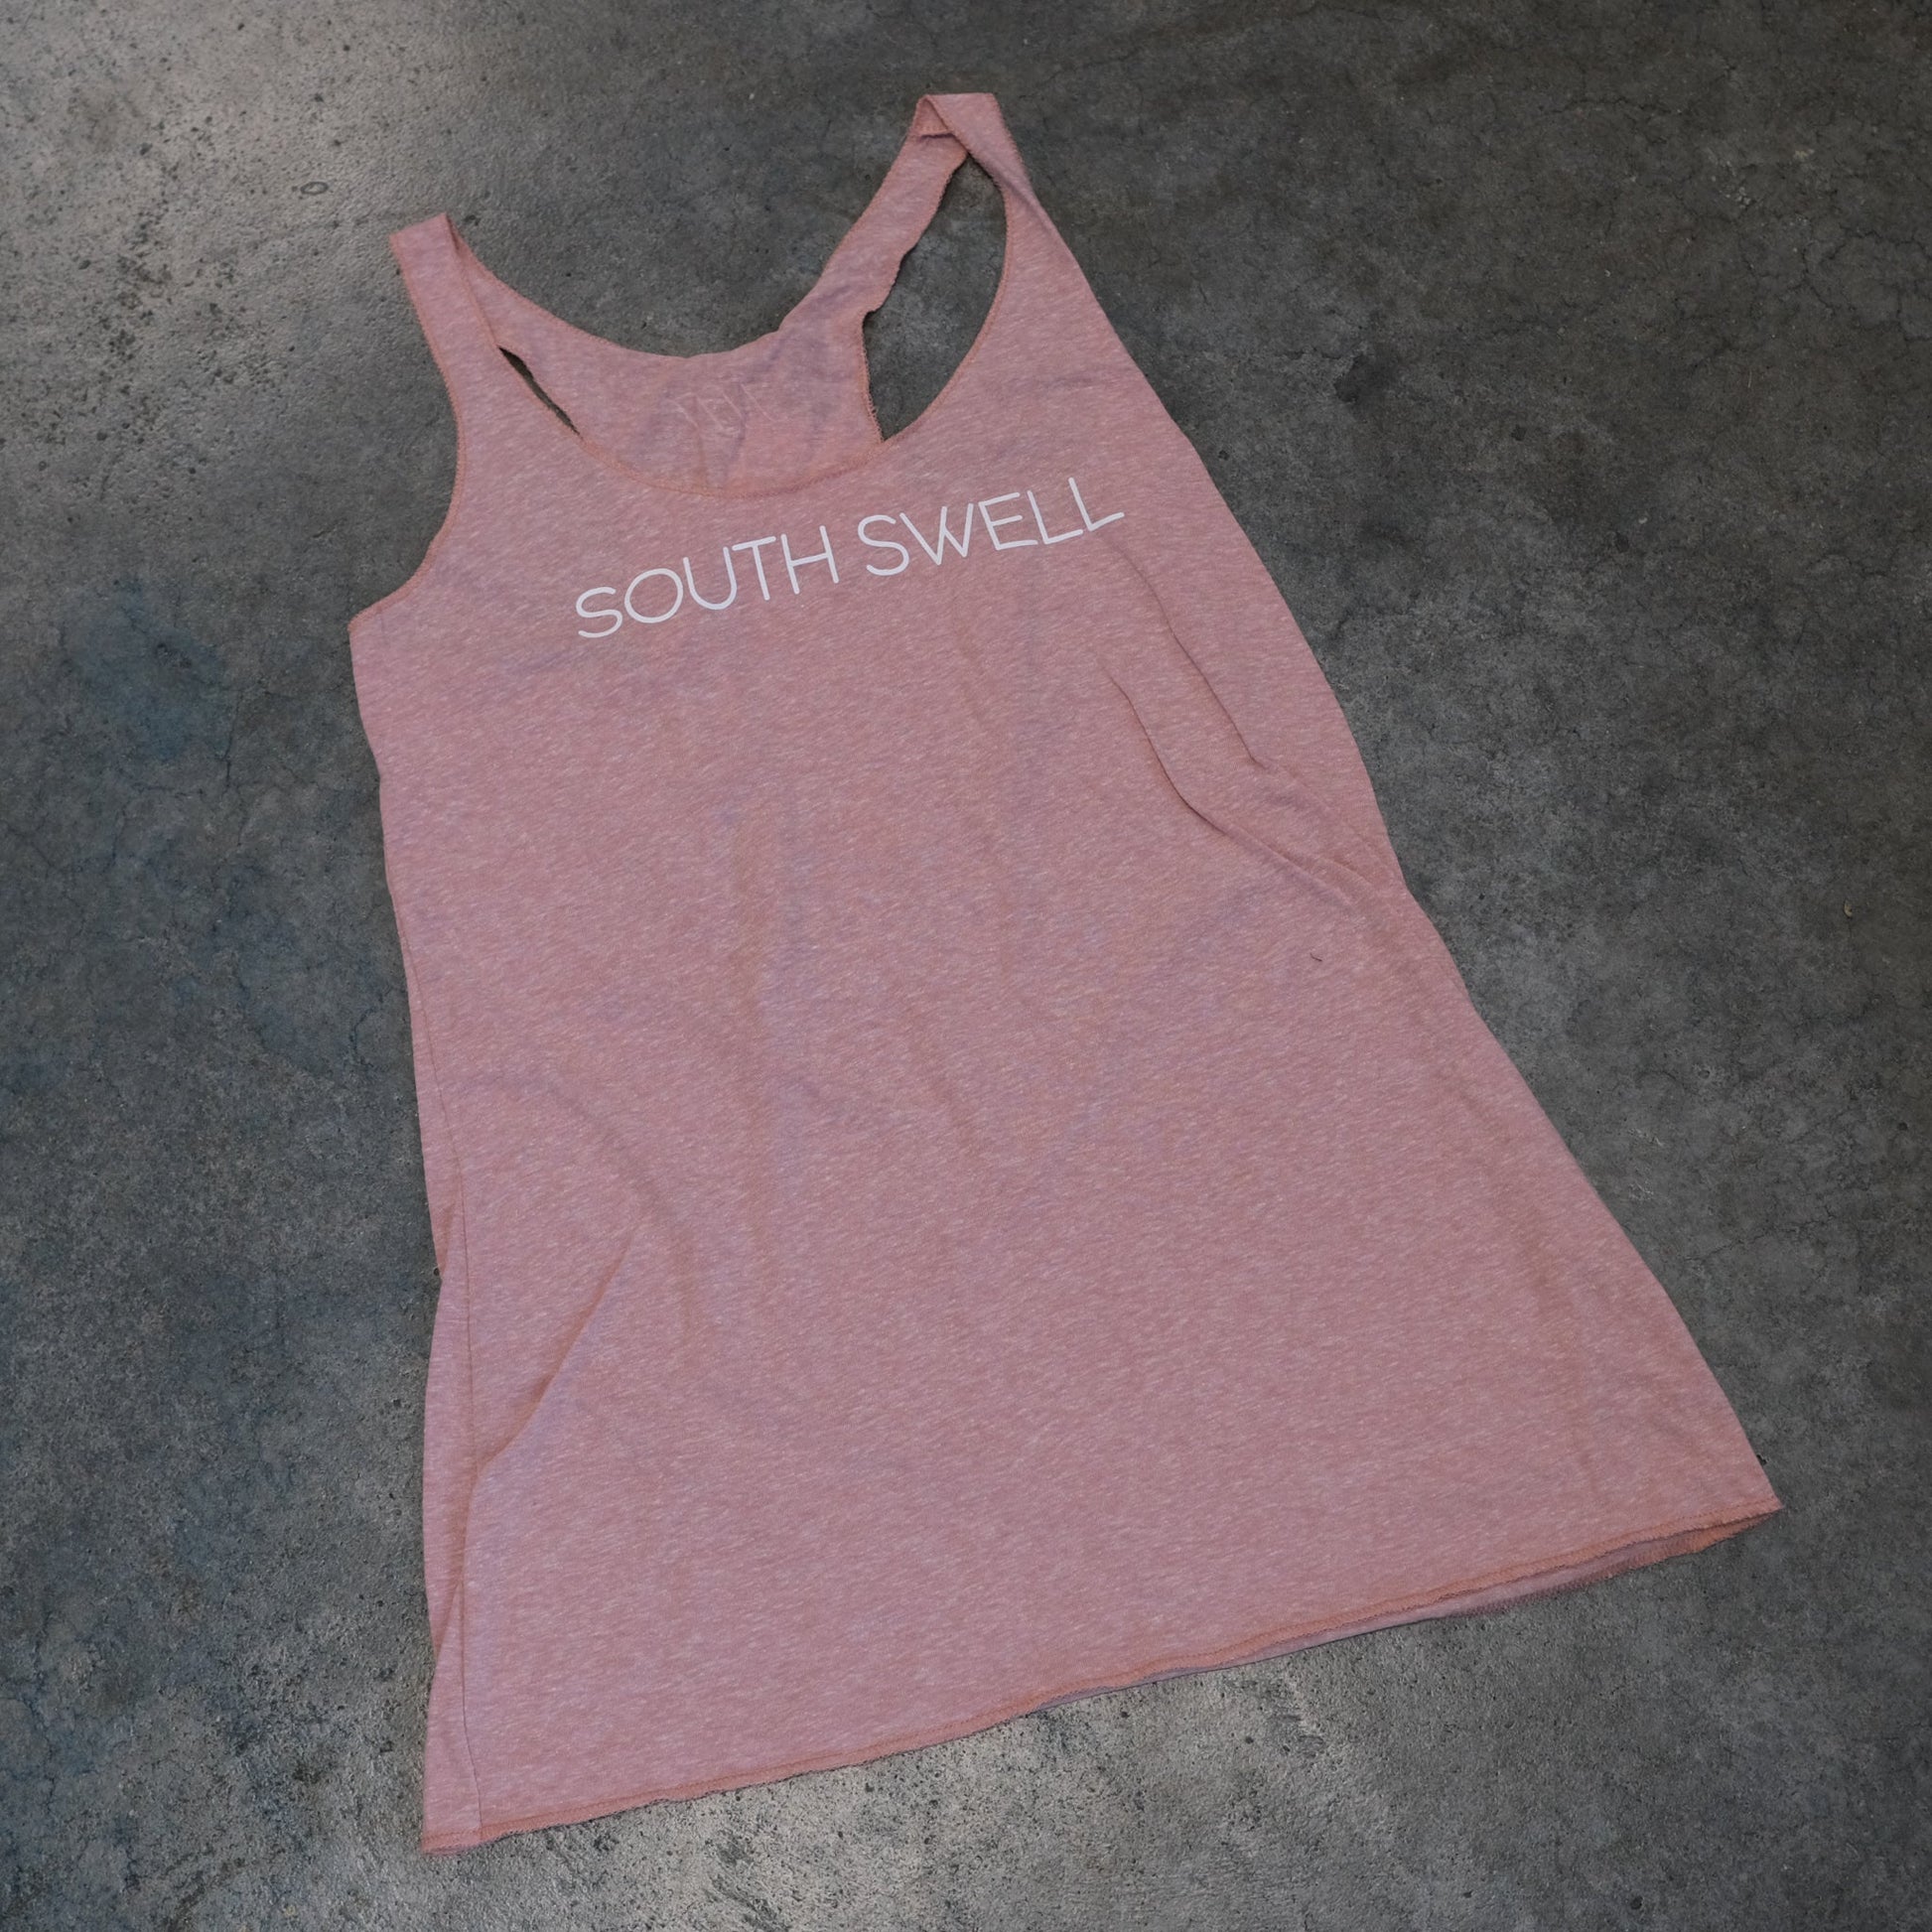 SOUTH SWELL Women's Text Tank Top SOUTH SWELL XS Desert Pink 